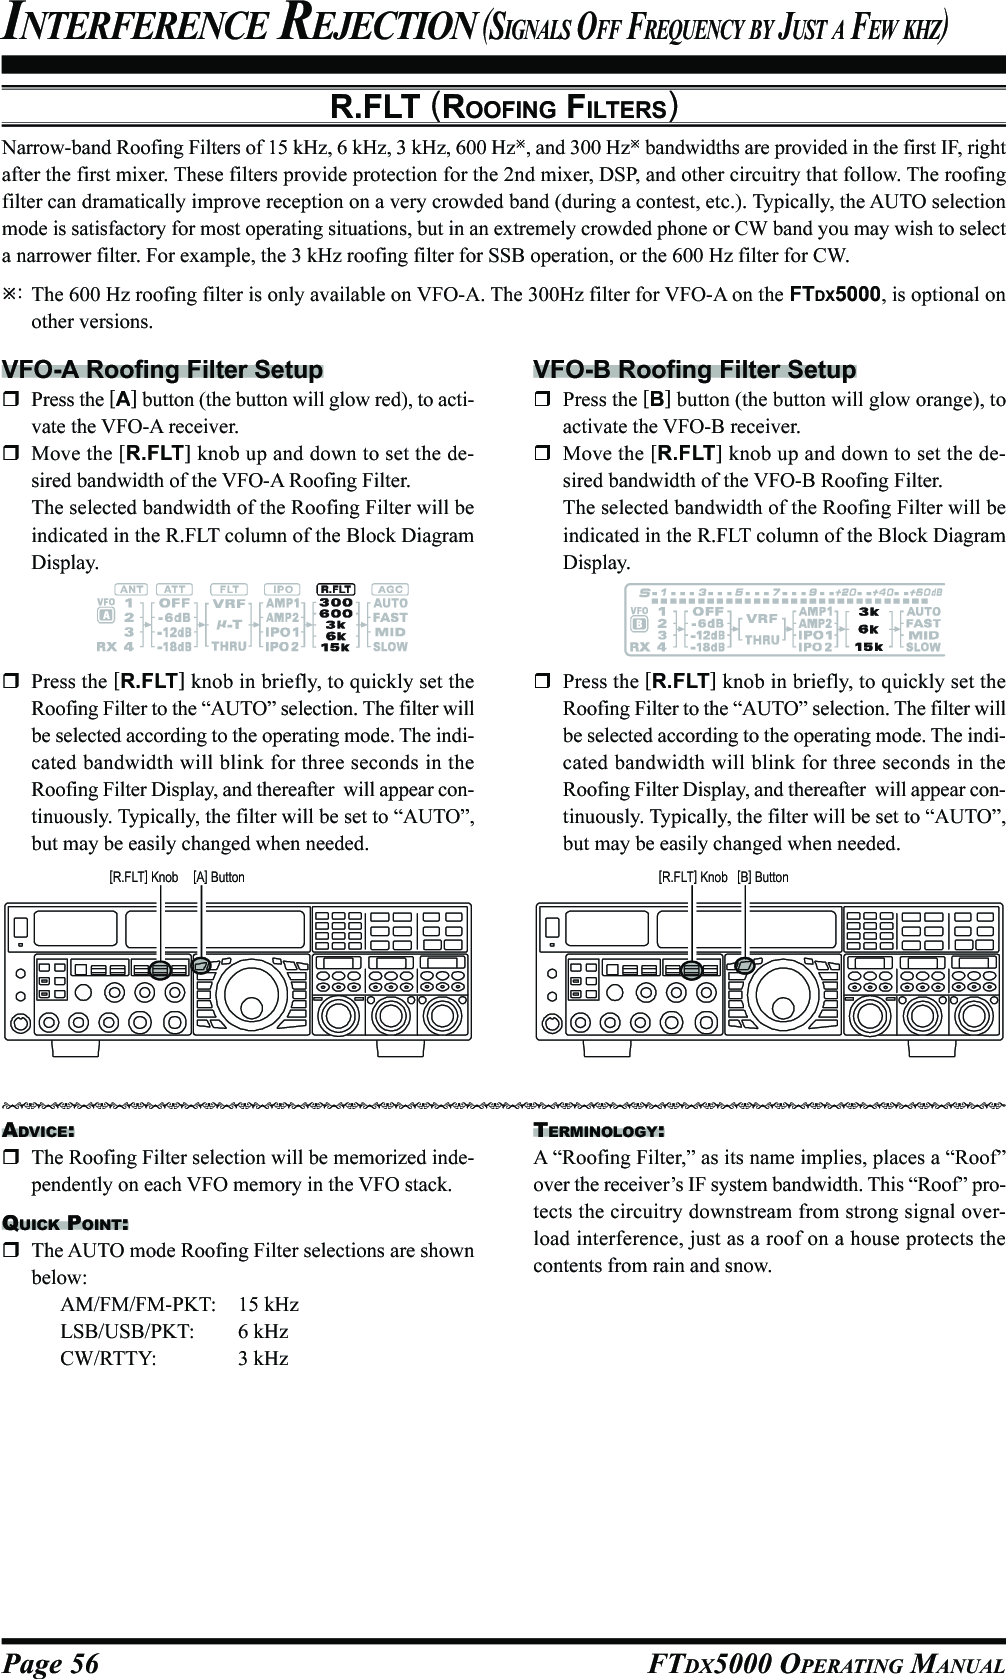 Page 56 FTDX5000 OPERATING MANUALR.FLT (ROOFING FILTERS)Narrow-band Roofing Filters of 15 kHz, 6 kHz, 3 kHz, 600 Hz, and 300 Hz bandwidths are provided in the first IF, rightafter the first mixer. These filters provide protection for the 2nd mixer, DSP, and other circuitry that follow. The roofingfilter can dramatically improve reception on a very crowded band (during a contest, etc.). Typically, the AUTO selectionmode is satisfactory for most operating situations, but in an extremely crowded phone or CW band you may wish to selecta narrower filter. For example, the 3 kHz roofing filter for SSB operation, or the 600 Hz filter for CW.:The 600 Hz roofing filter is only available on VFO-A. The 300Hz filter for VFO-A on the FTDX5000, is optional onother versions.INTERFERENCE REJECTION (SIGNALS OFF FREQUENCY BY JUST A FEW KHZ)VFO-A Roofing Filter SetupPress the [A] button (the button will glow red), to acti-vate the VFO-A receiver.Move the [R.FLT] knob up and down to set the de-sired bandwidth of the VFO-A Roofing Filter.The selected bandwidth of the Roofing Filter will beindicated in the R.FLT column of the Block DiagramDisplay.VFO-B Roofing Filter SetupPress the [B] button (the button will glow orange), toactivate the VFO-B receiver.Move the [R.FLT] knob up and down to set the de-sired bandwidth of the VFO-B Roofing Filter.The selected bandwidth of the Roofing Filter will beindicated in the R.FLT column of the Block DiagramDisplay.ADVICE:The Roofing Filter selection will be memorized inde-pendently on each VFO memory in the VFO stack.QUICK POINT:The AUTO mode Roofing Filter selections are shownbelow:AM/FM/FM-PKT: 15 kHzLSB/USB/PKT: 6 kHzCW/RTTY: 3 kHzPress the [R.FLT] knob in briefly, to quickly set theRoofing Filter to the “AUTO” selection. The filter willbe selected according to the operating mode. The indi-cated bandwidth will blink for three seconds in theRoofing Filter Display, and thereafter  will appear con-tinuously. Typically, the filter will be set to “AUTO”,but may be easily changed when needed.Press the [R.FLT] knob in briefly, to quickly set theRoofing Filter to the “AUTO” selection. The filter willbe selected according to the operating mode. The indi-cated bandwidth will blink for three seconds in theRoofing Filter Display, and thereafter  will appear con-tinuously. Typically, the filter will be set to “AUTO”,but may be easily changed when needed.TERMINOLOGY:A “Roofing Filter,” as its name implies, places a “Roof”over the receiver’s IF system bandwidth. This “Roof” pro-tects the circuitry downstream from strong signal over-load interference, just as a roof on a house protects thecontents from rain and snow.[A] Button[R.FLT] Knob [B] Button[R.FLT] Knob